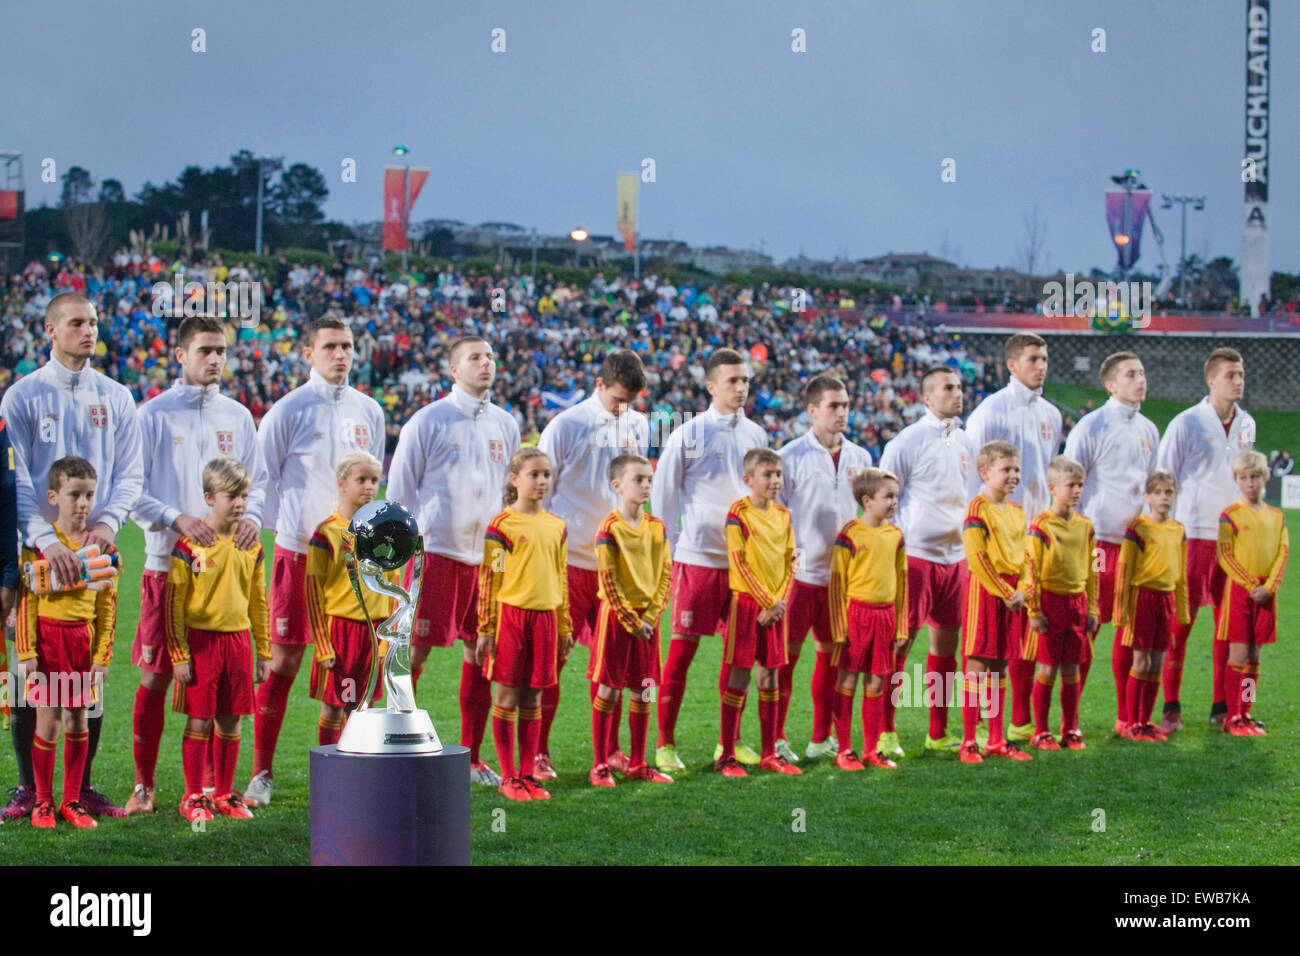 Auckland, New Zealand, Feature. 20th June, 2015. Auckland, New Zealand - June 20, 2015 - The FIFA U20 World Cup Trophy is displayed with Team Serbia in the background ahead of the FIFA U20 World Cup final match between Brazil and Serbia at North Harbour Stadium on June 20, 2015 in Auckland, New Zealand, Feature. Credit:  dpa/Alamy Live News Stock Photo